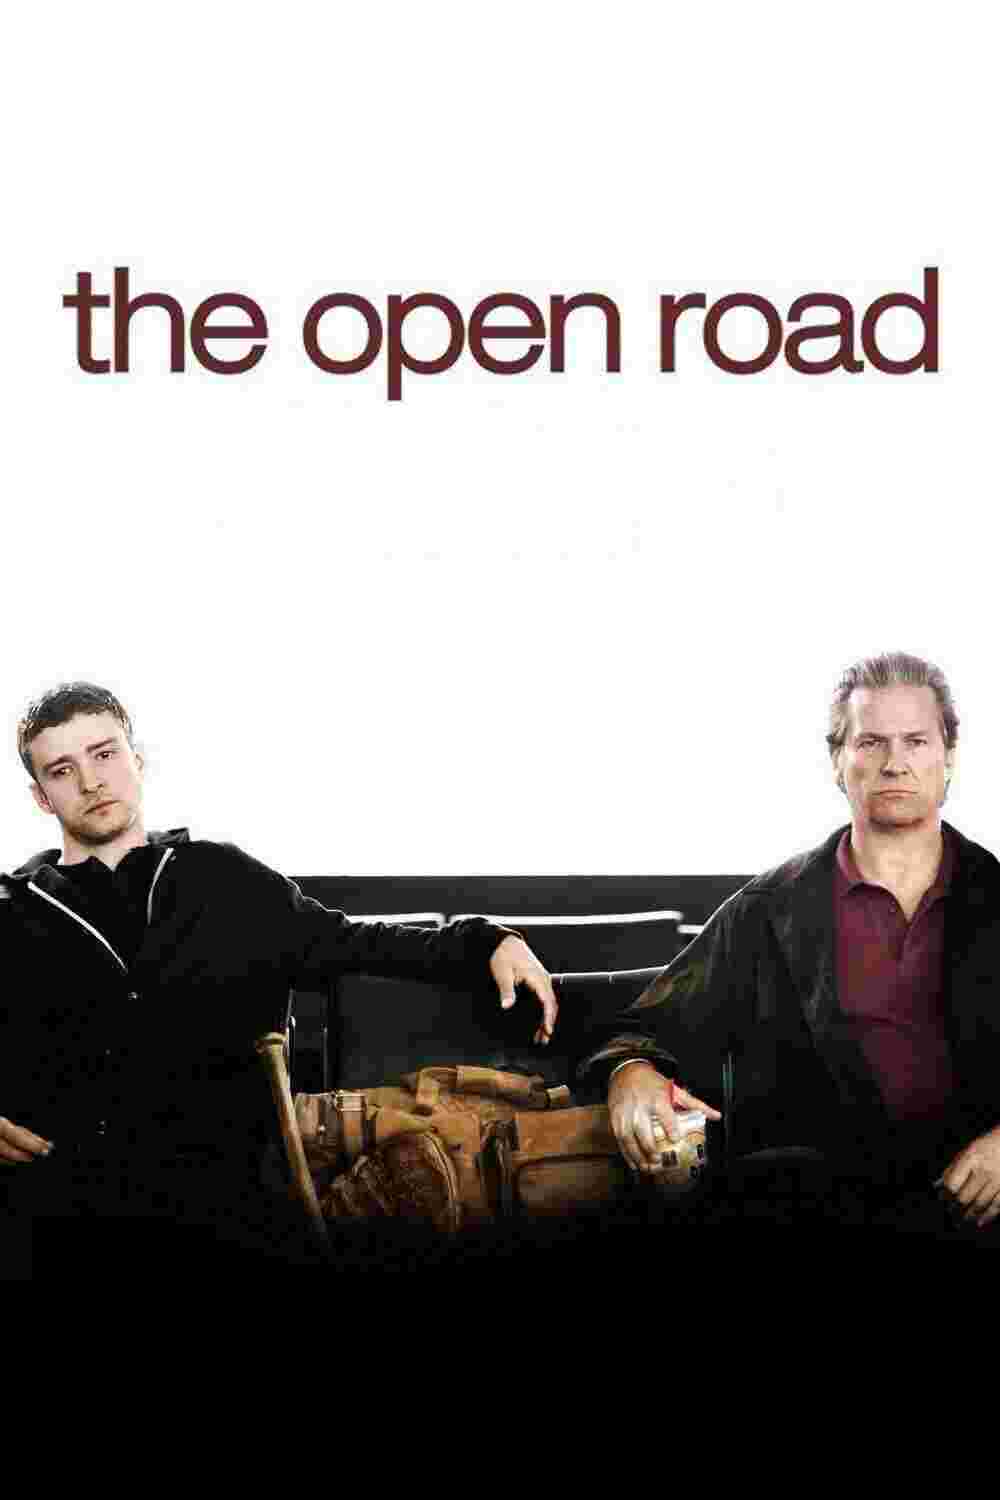 The Open Road (2009) Justin Timberlake